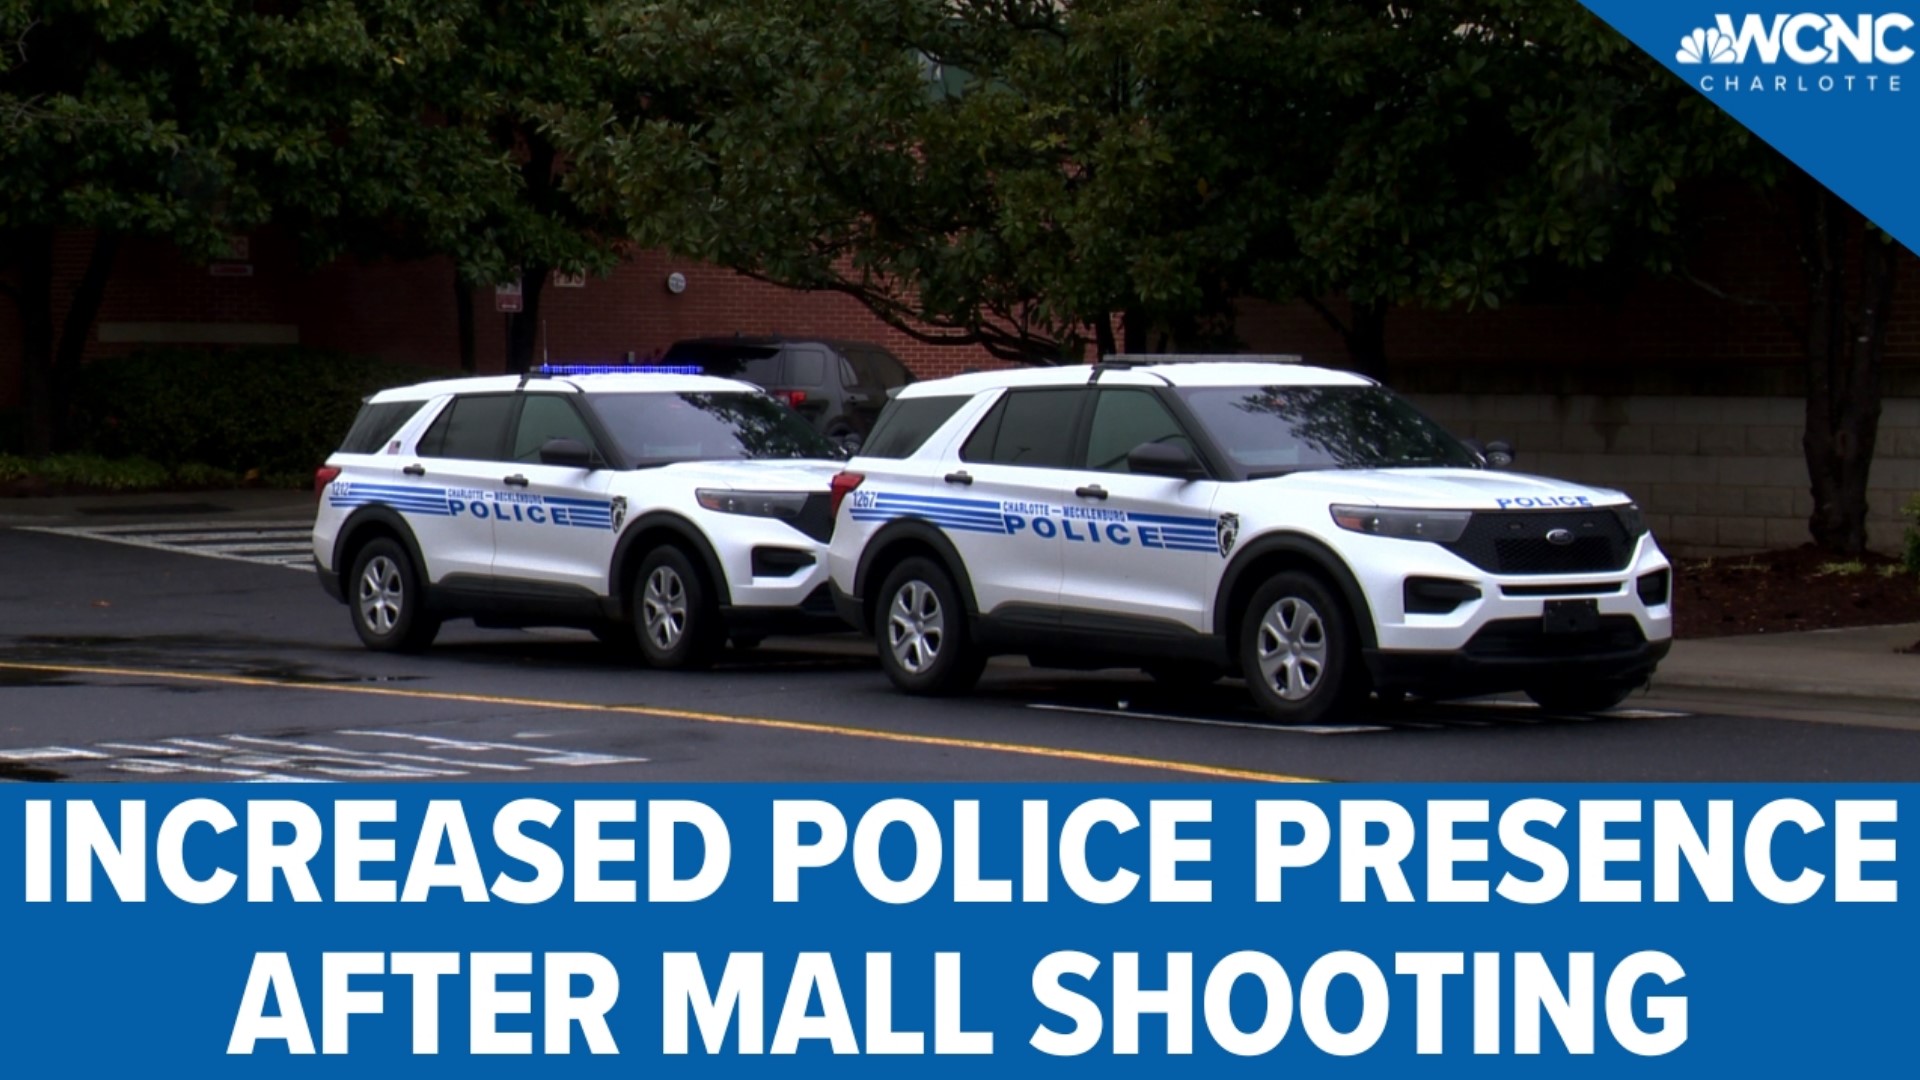 Nicole Peternel, spokesperson for the Northlake Mall, said the mall increased security measures for Friday following the event.